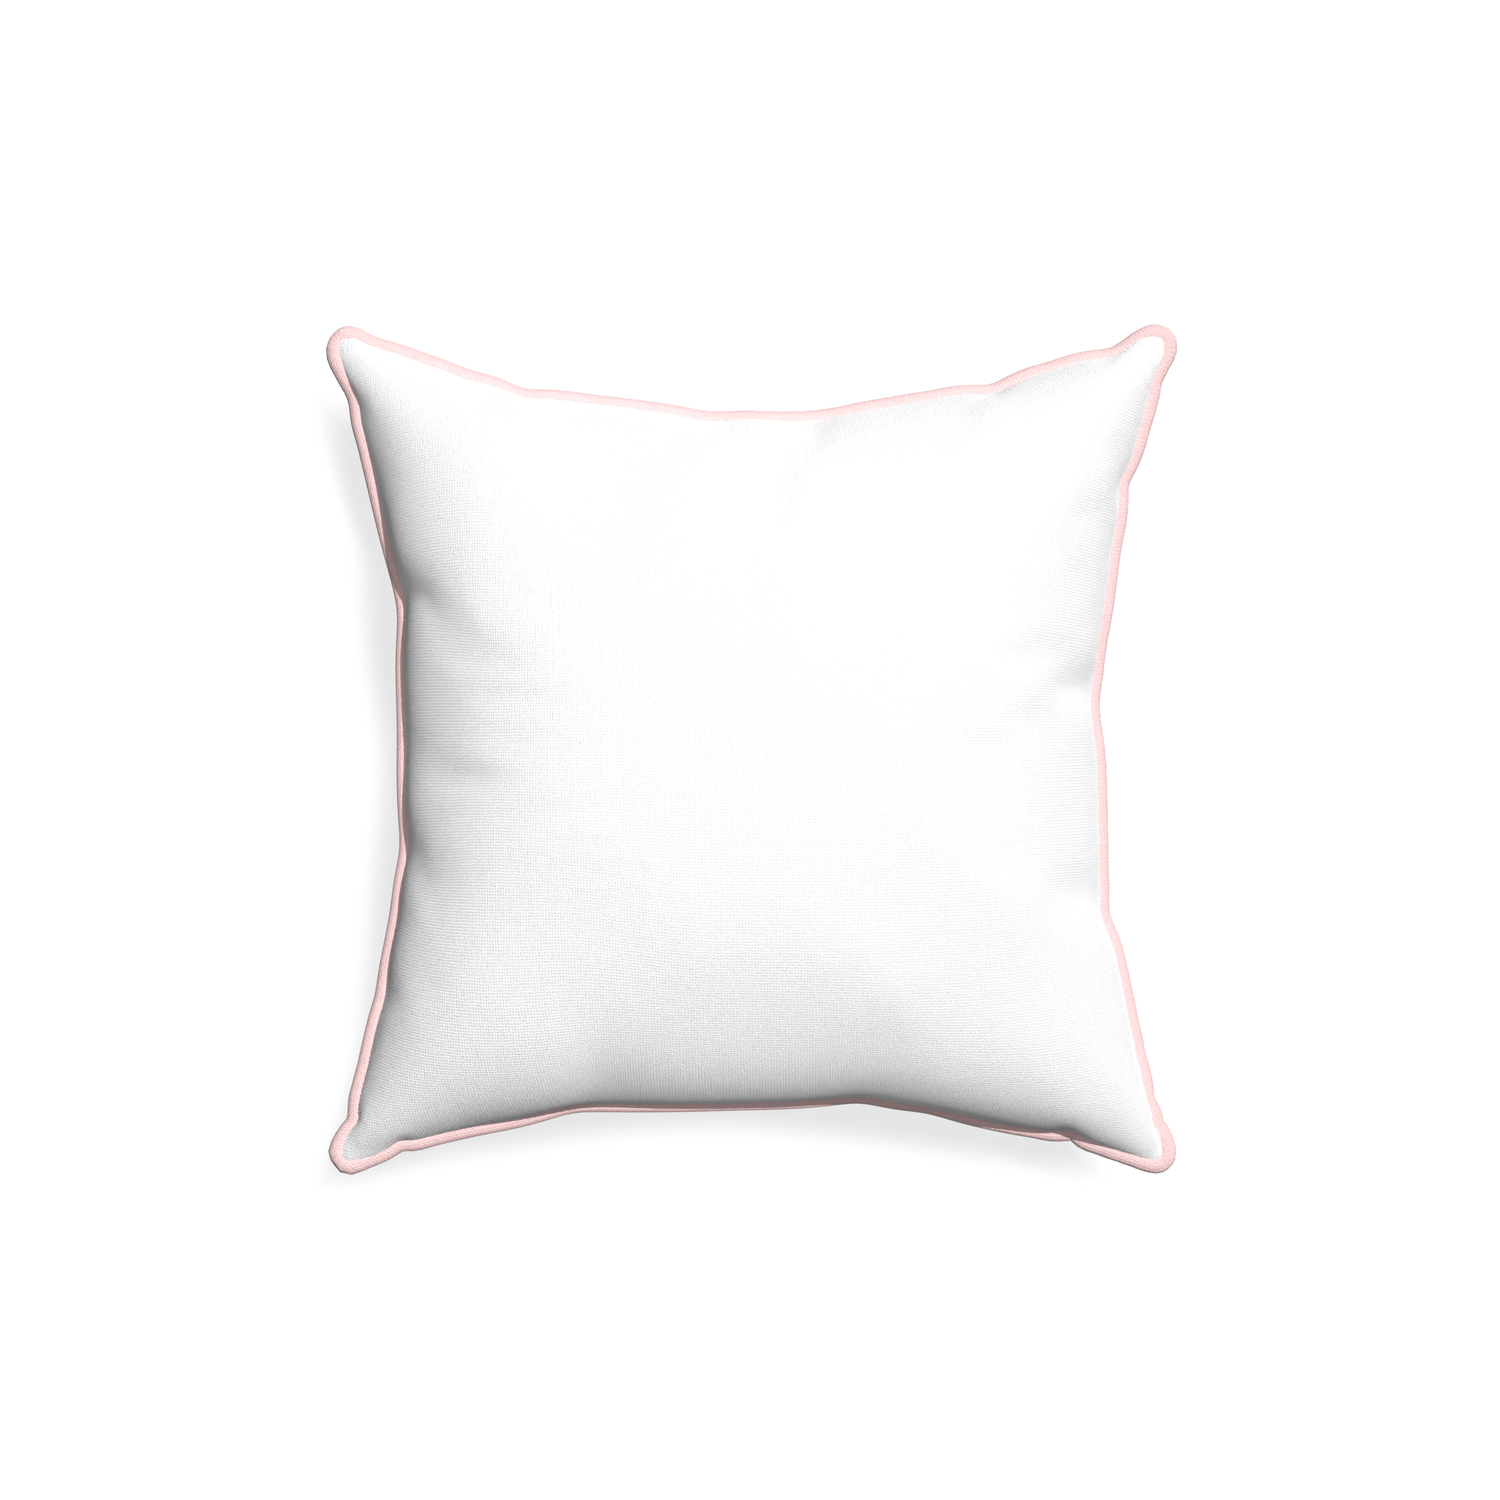 18-square snow custom white cottonpillow with petal piping on white background